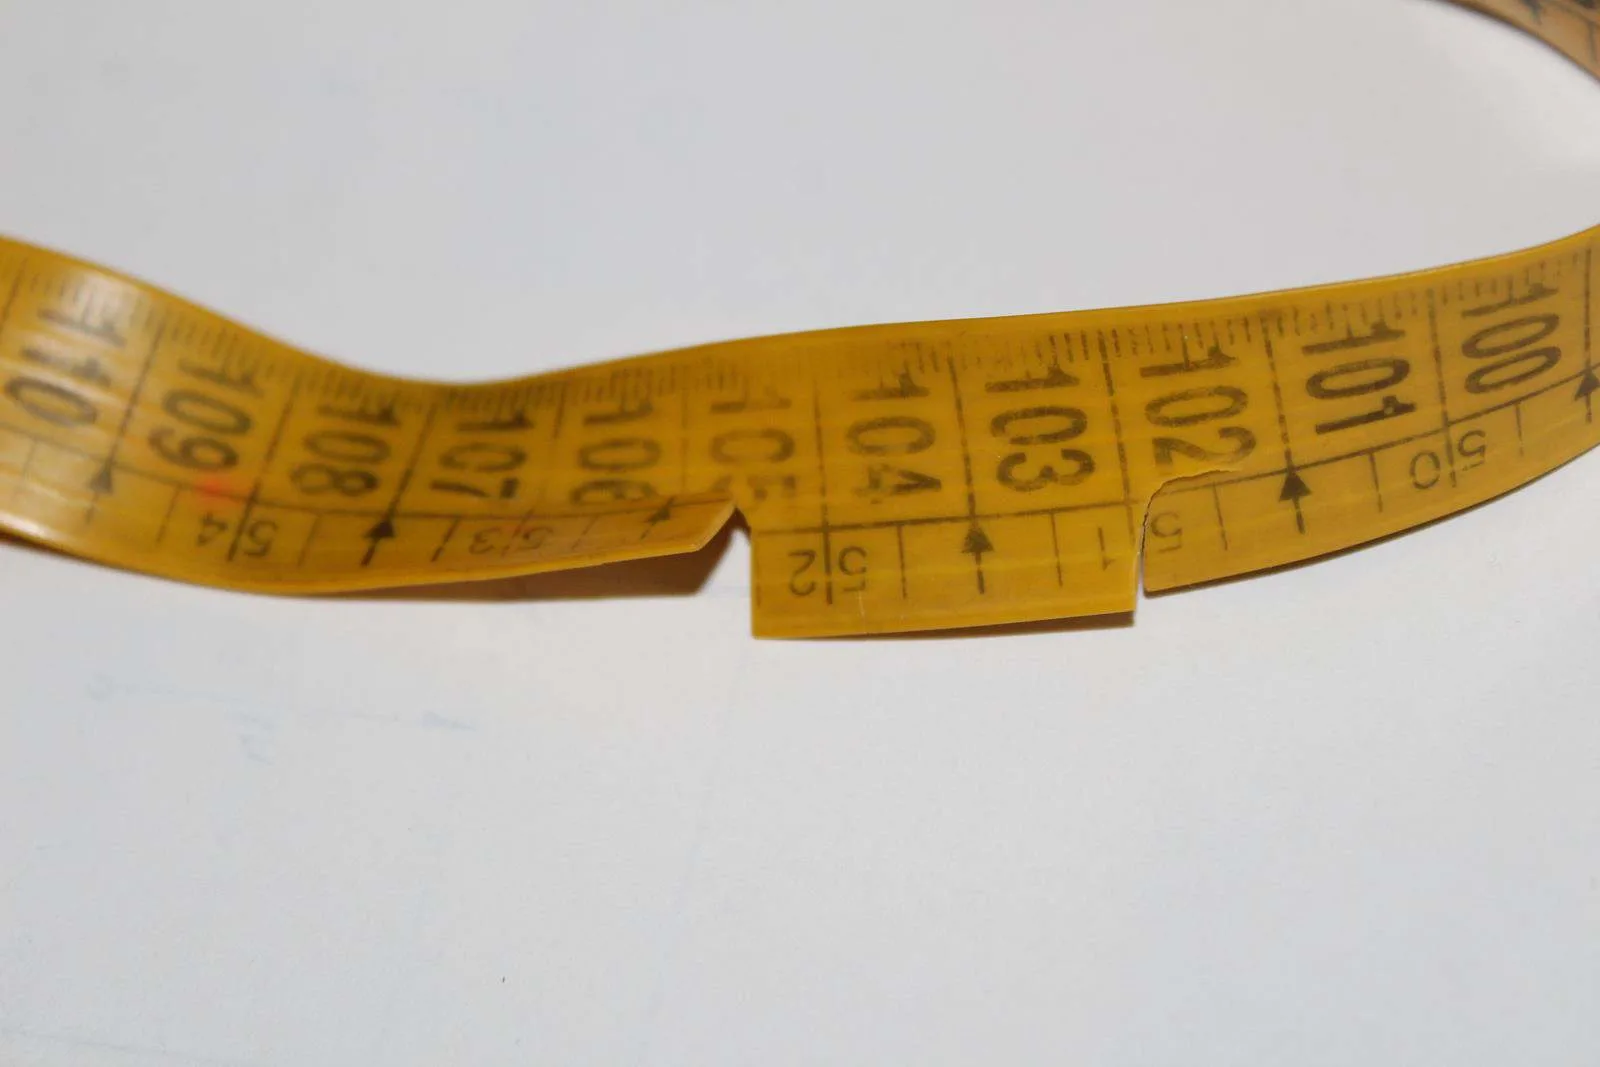 damaged measuring tape image to share proper care of sewing tools and equipment